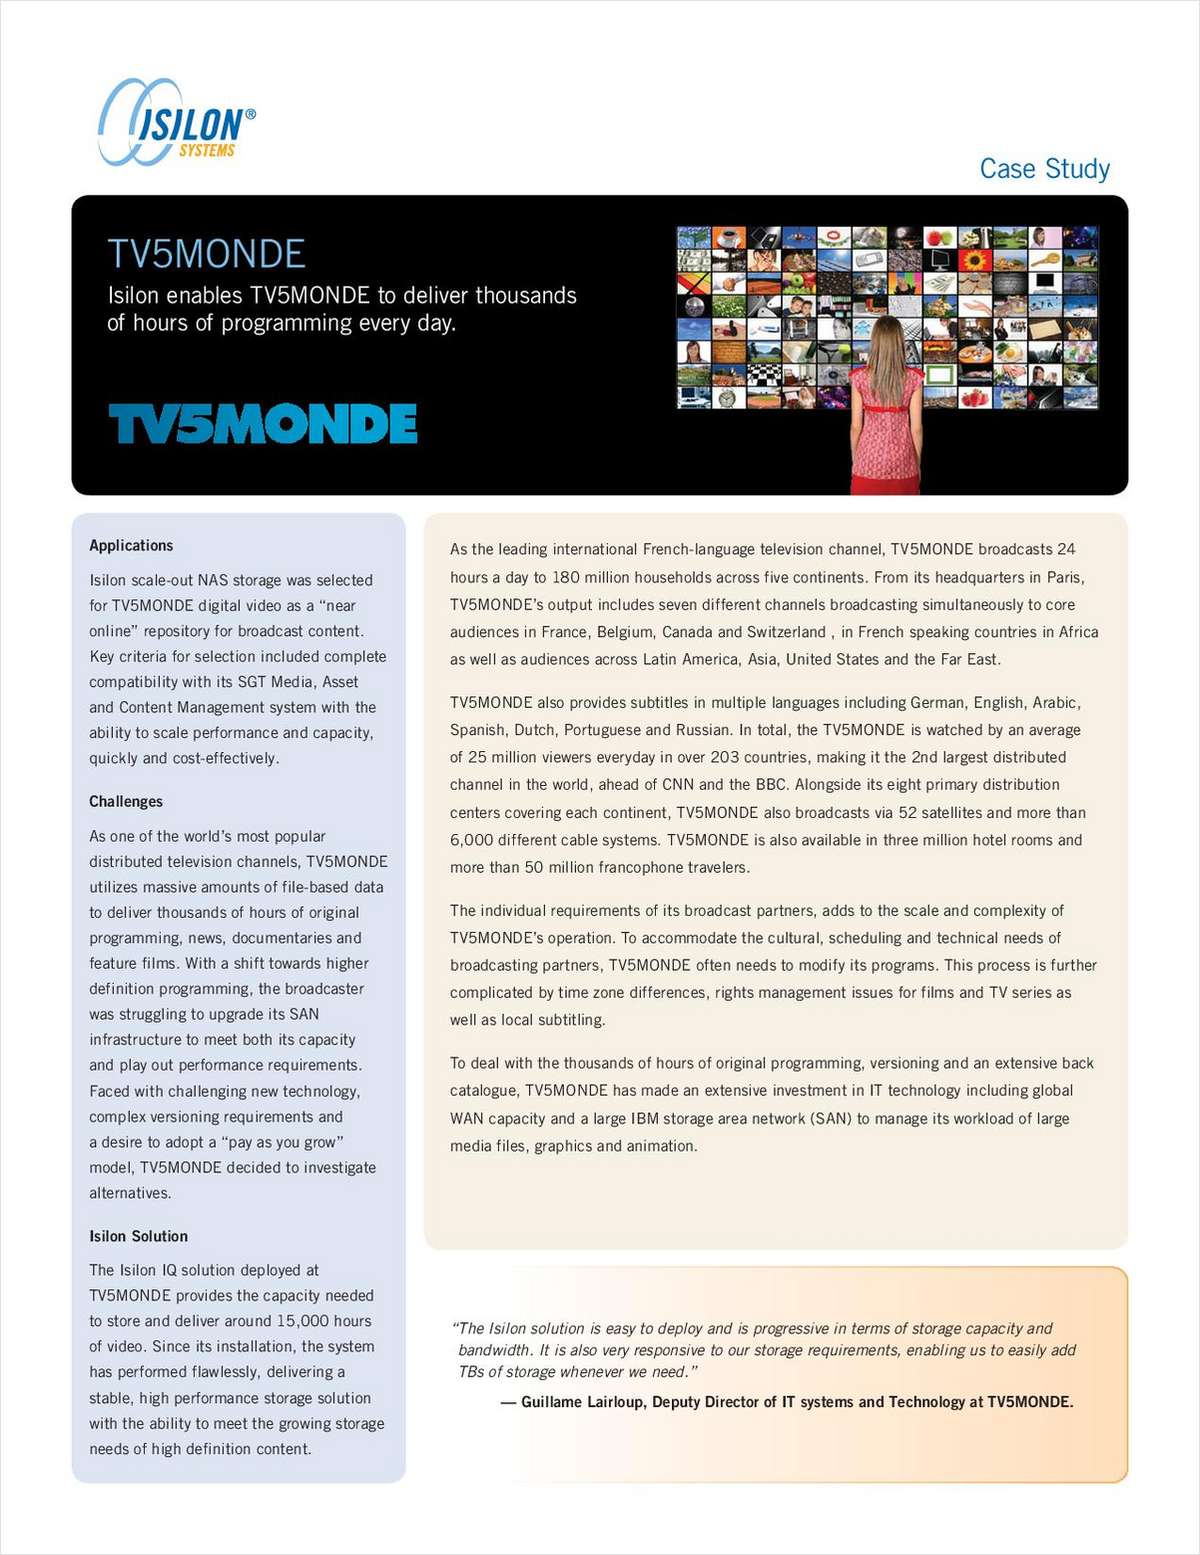 Case Study: TV5MONDE Delivers Programming 24 Hours a Day